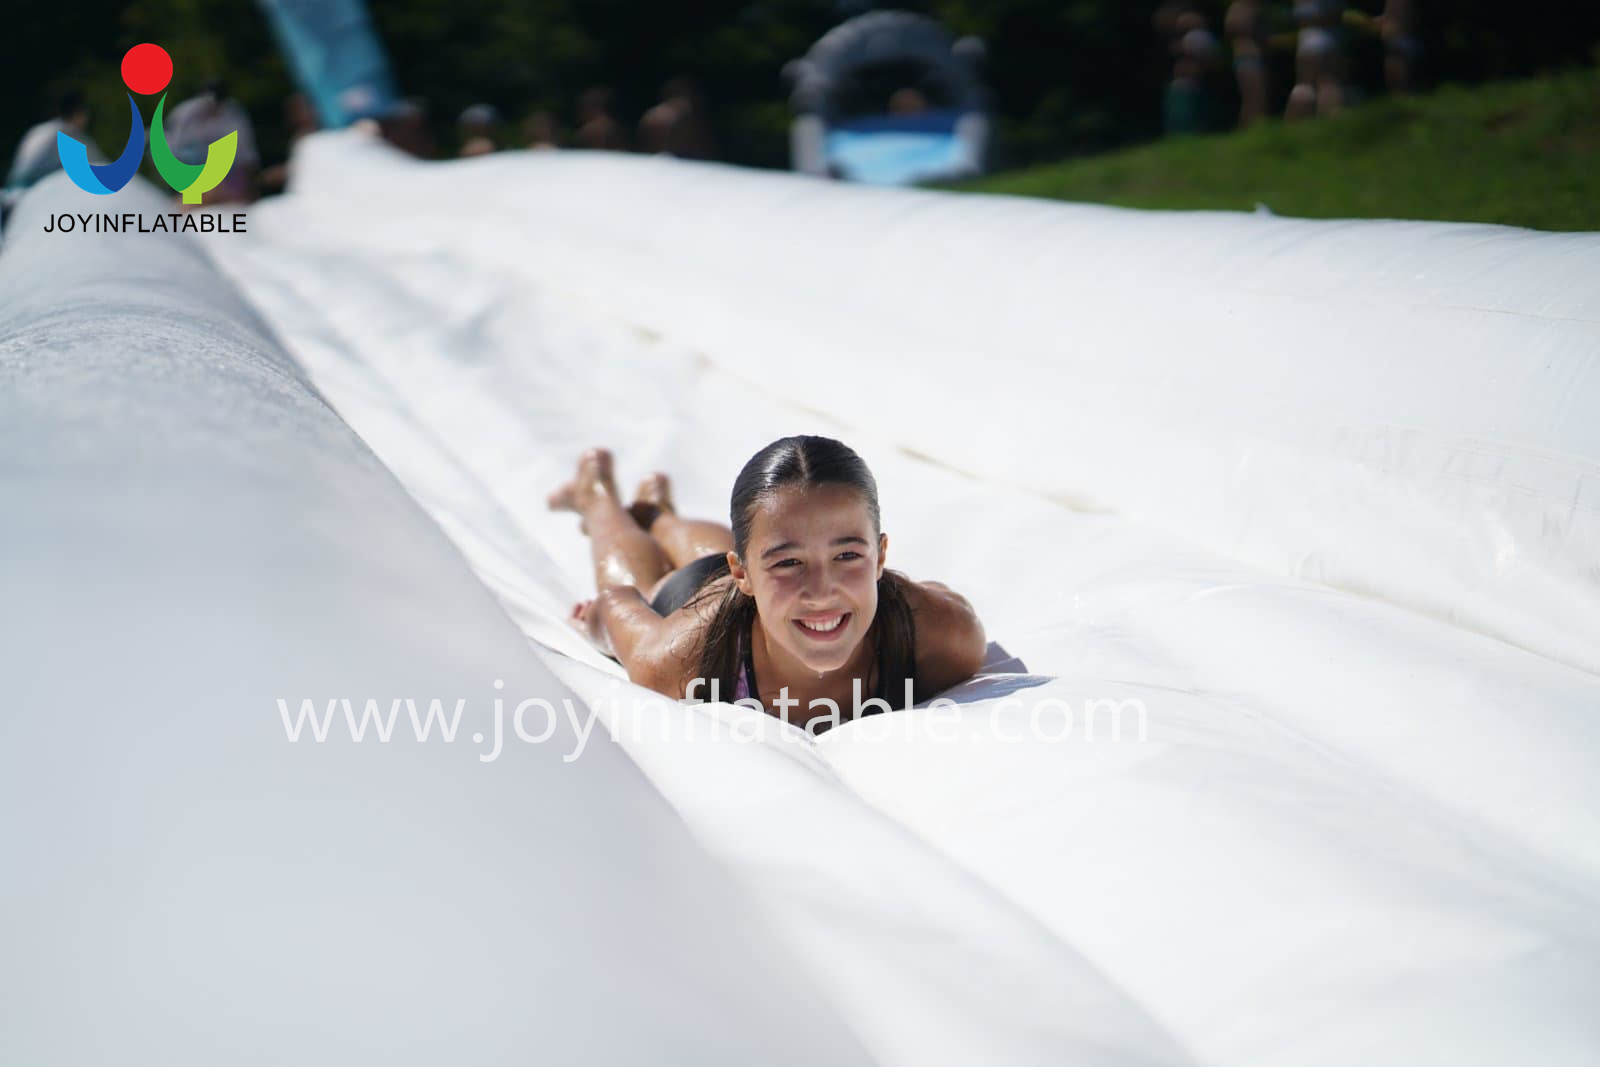 JOY Inflatable Custom made big waterslide for sale supply for kids-3